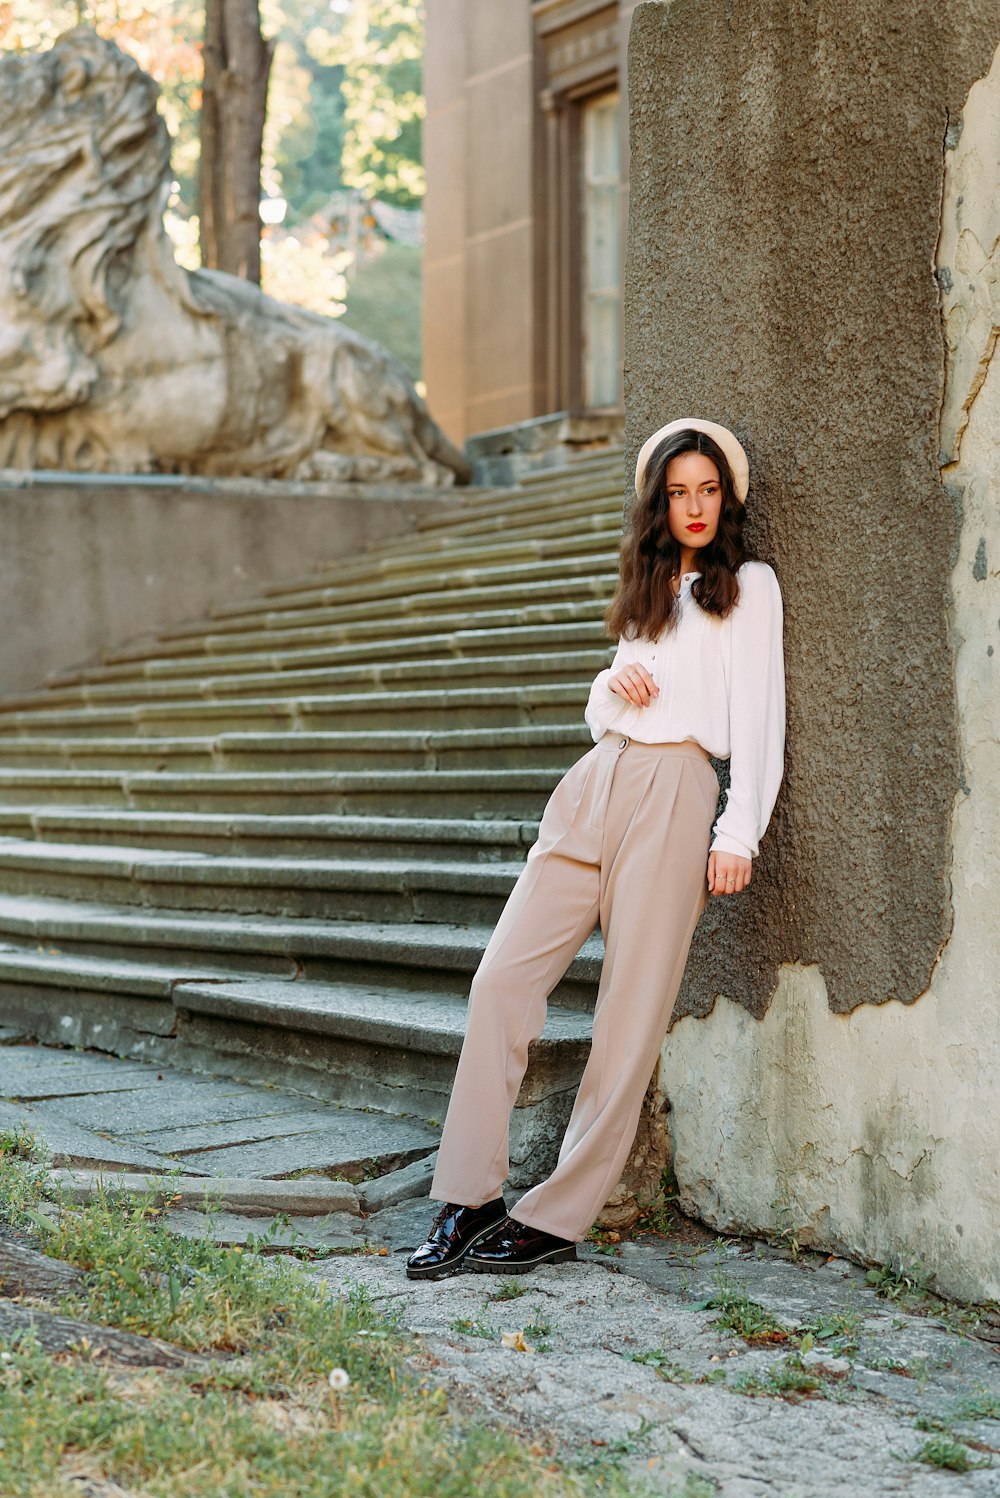 woman in white long sleeve shirt and brown pants standing on gray concrete stairs